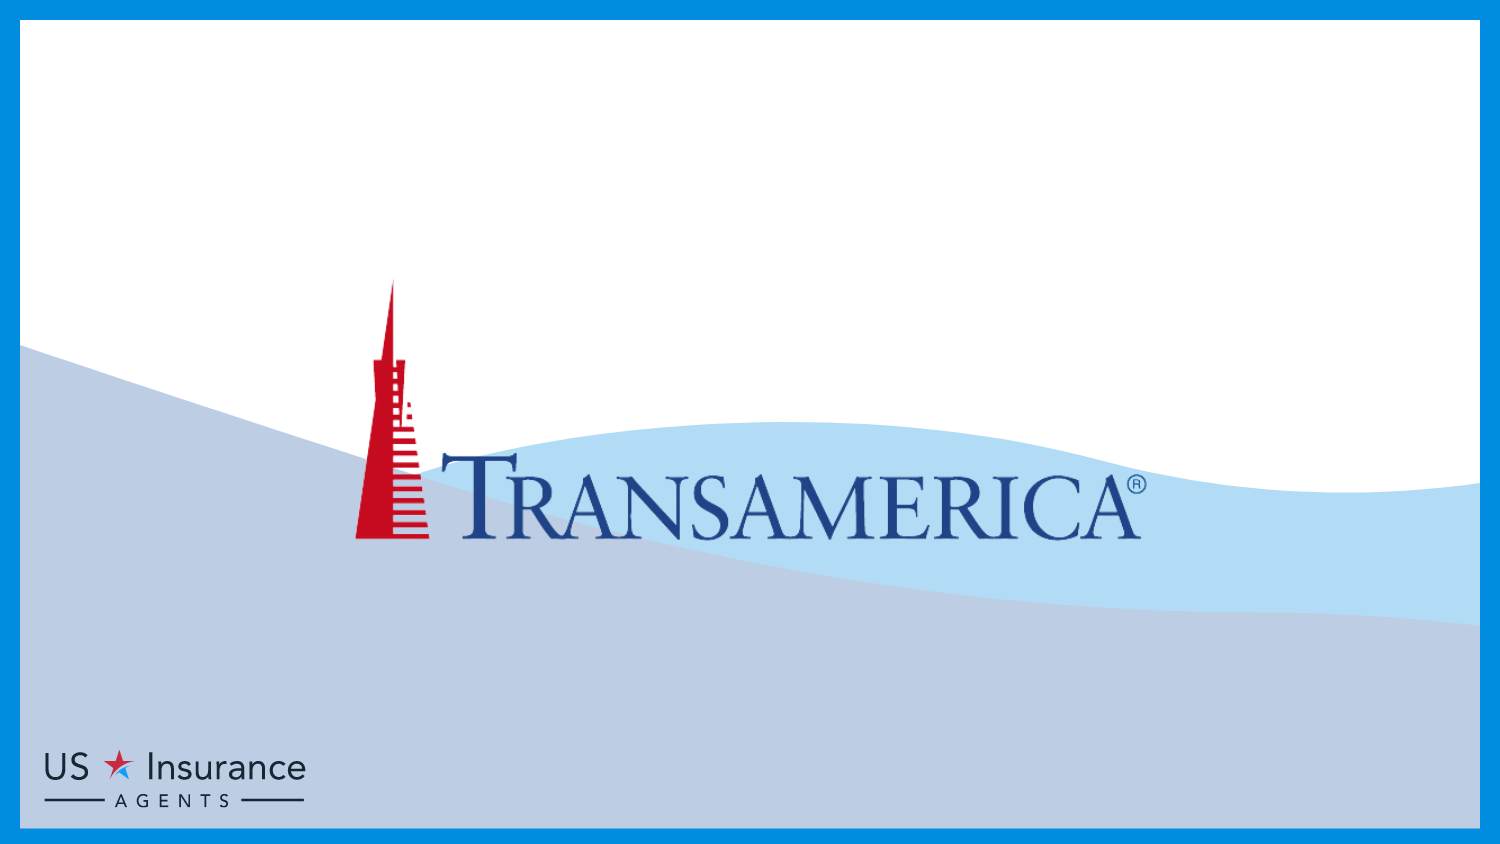 Transamerica: Best Life Insurance for Cyclists